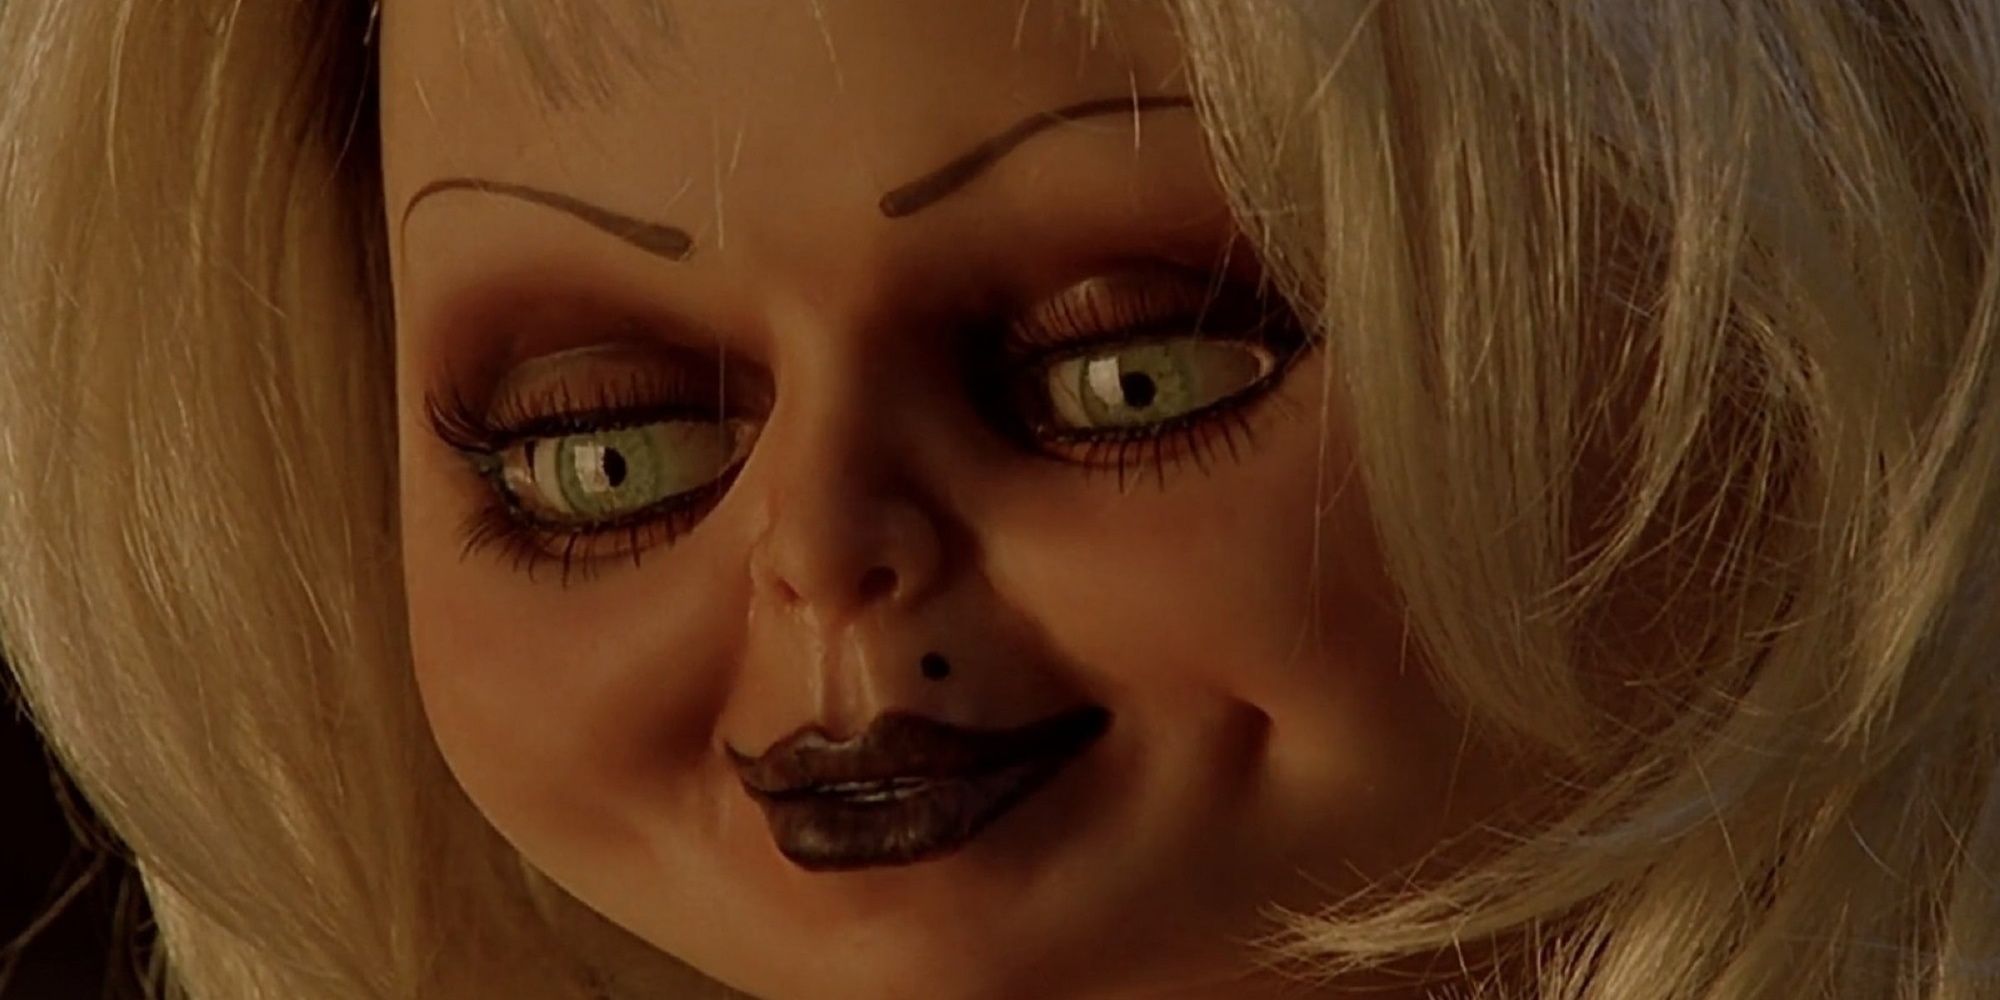 Doll version of Tiffany in Bride of Chucky.